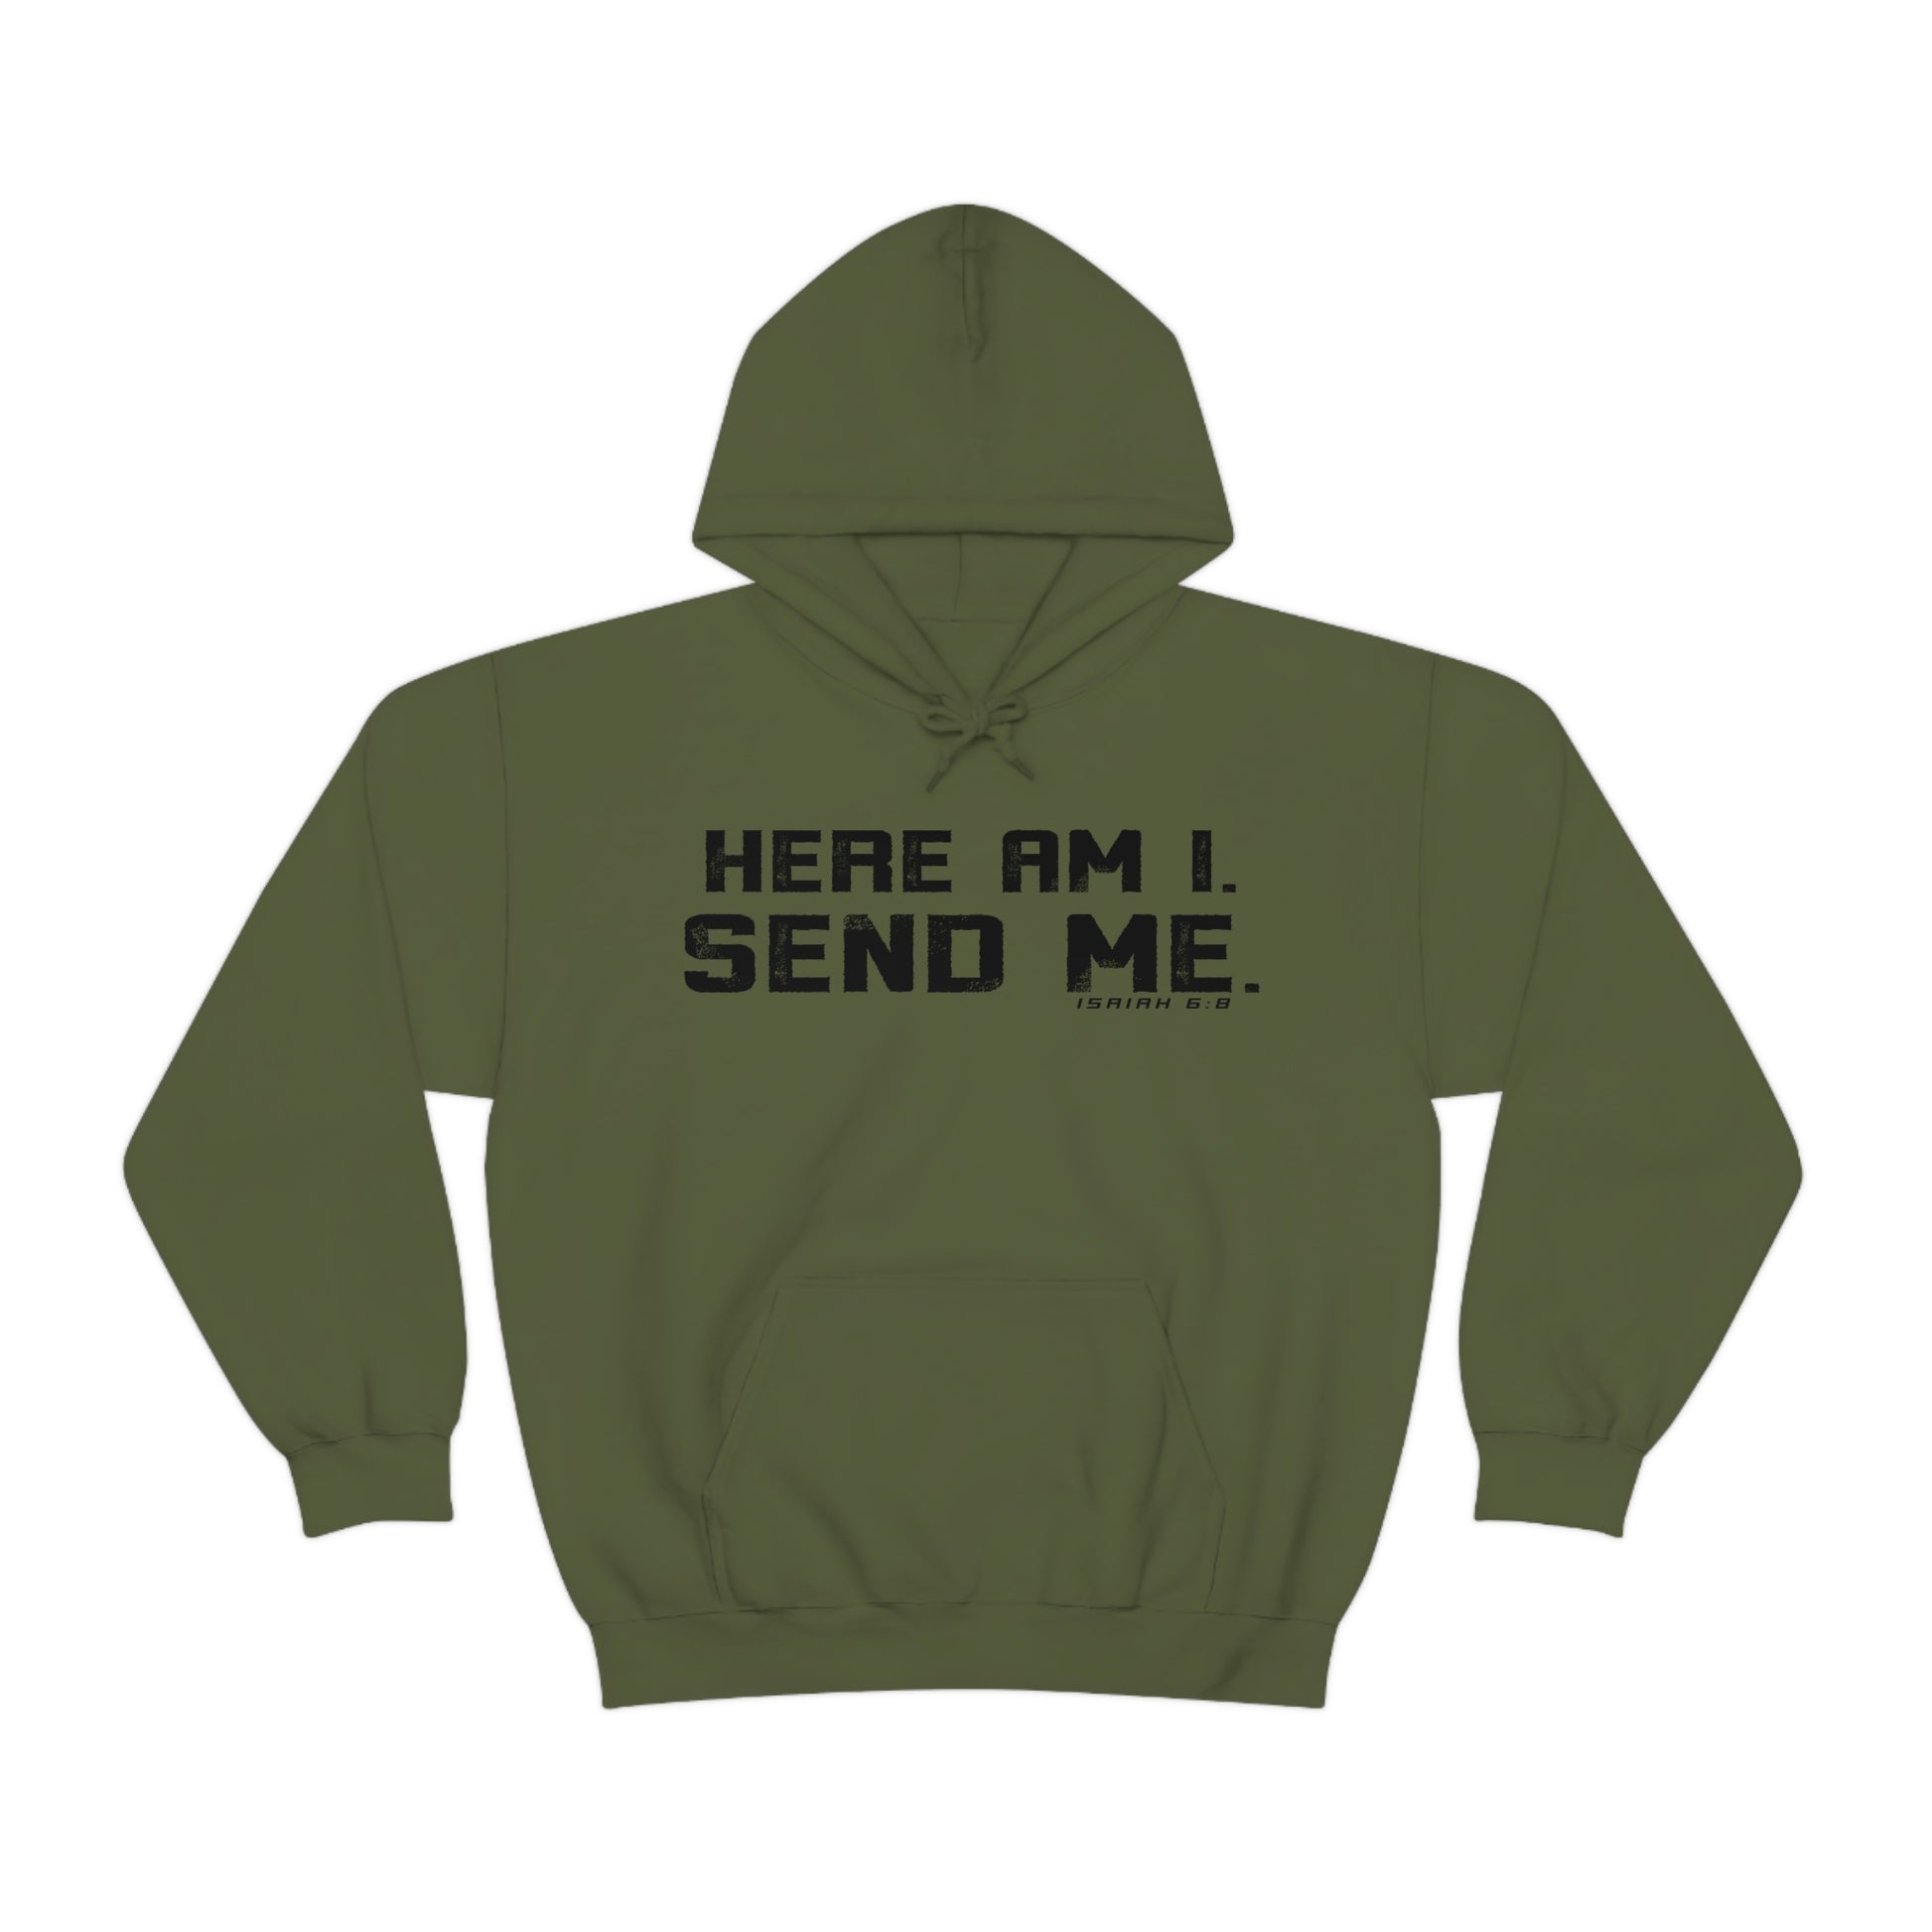 Here am I Bible Verse for Christians printed on olive green gildan hoodie